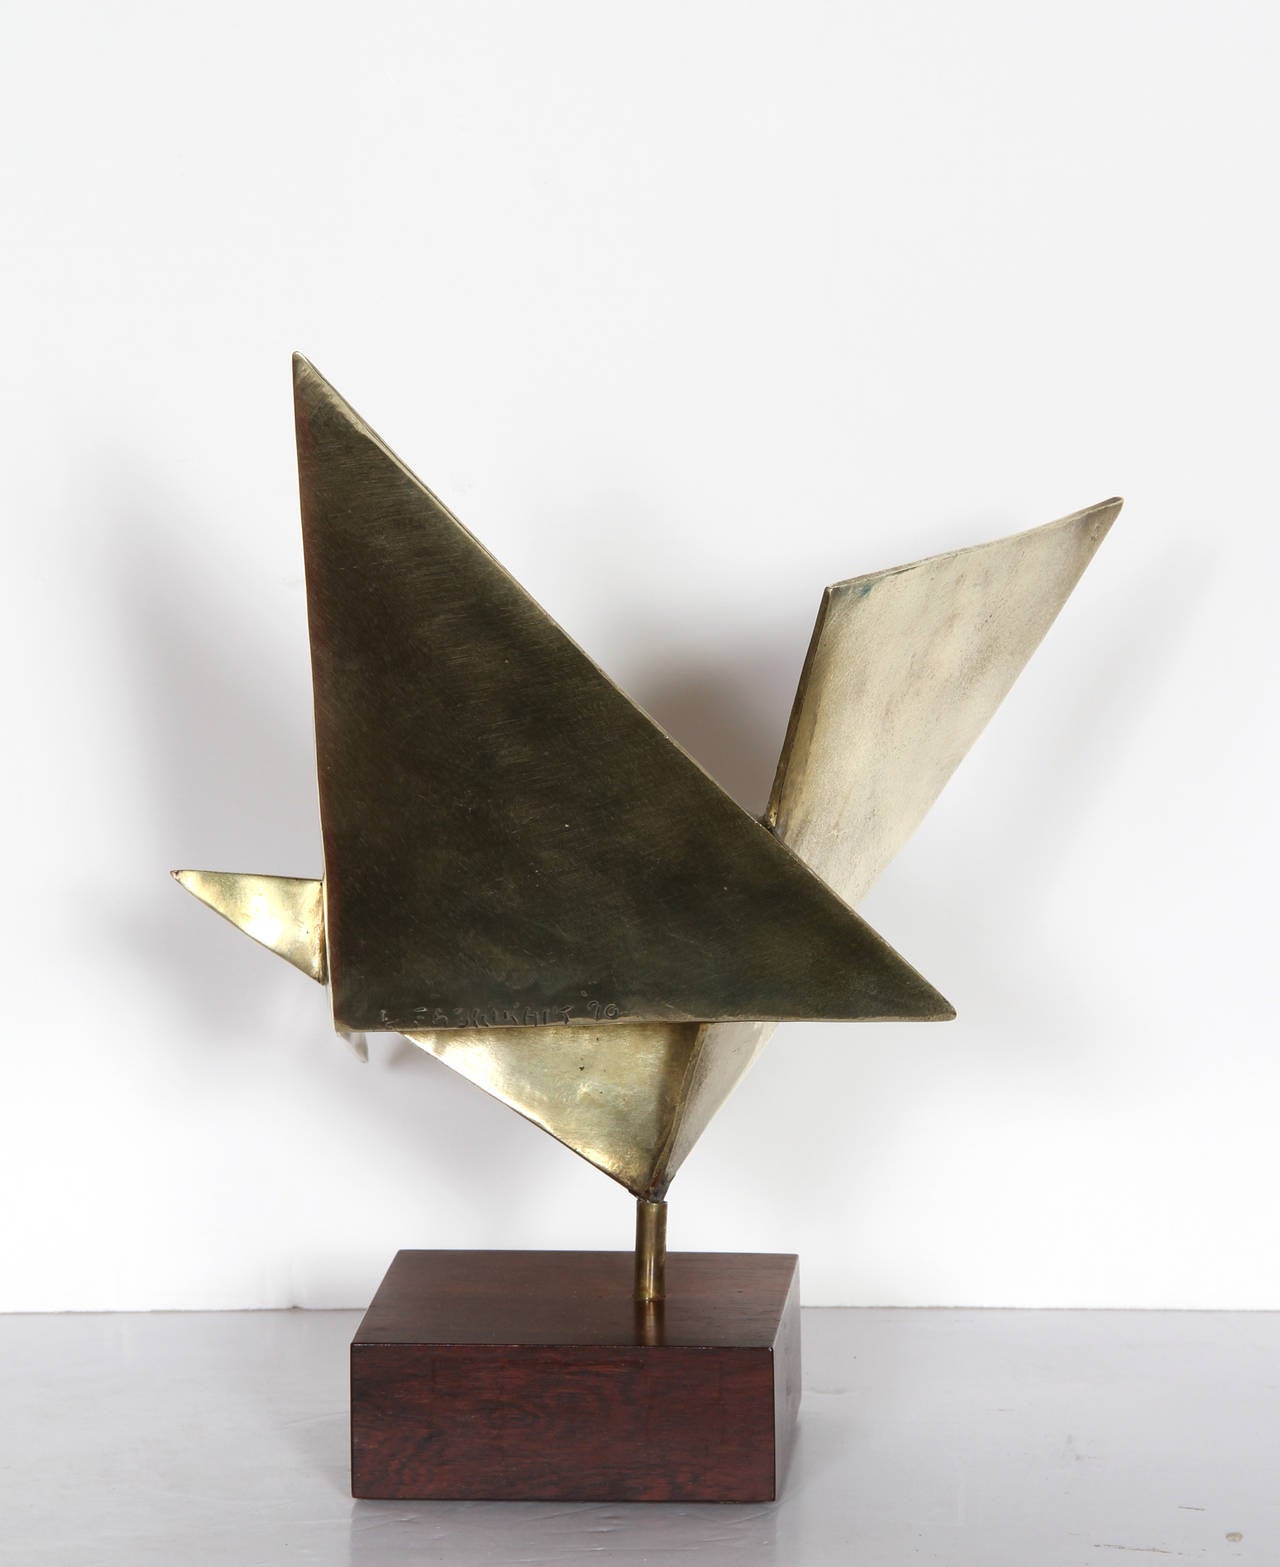 Geometric Abstract, Bronze Sculpture by Elayne Fabrikant 2